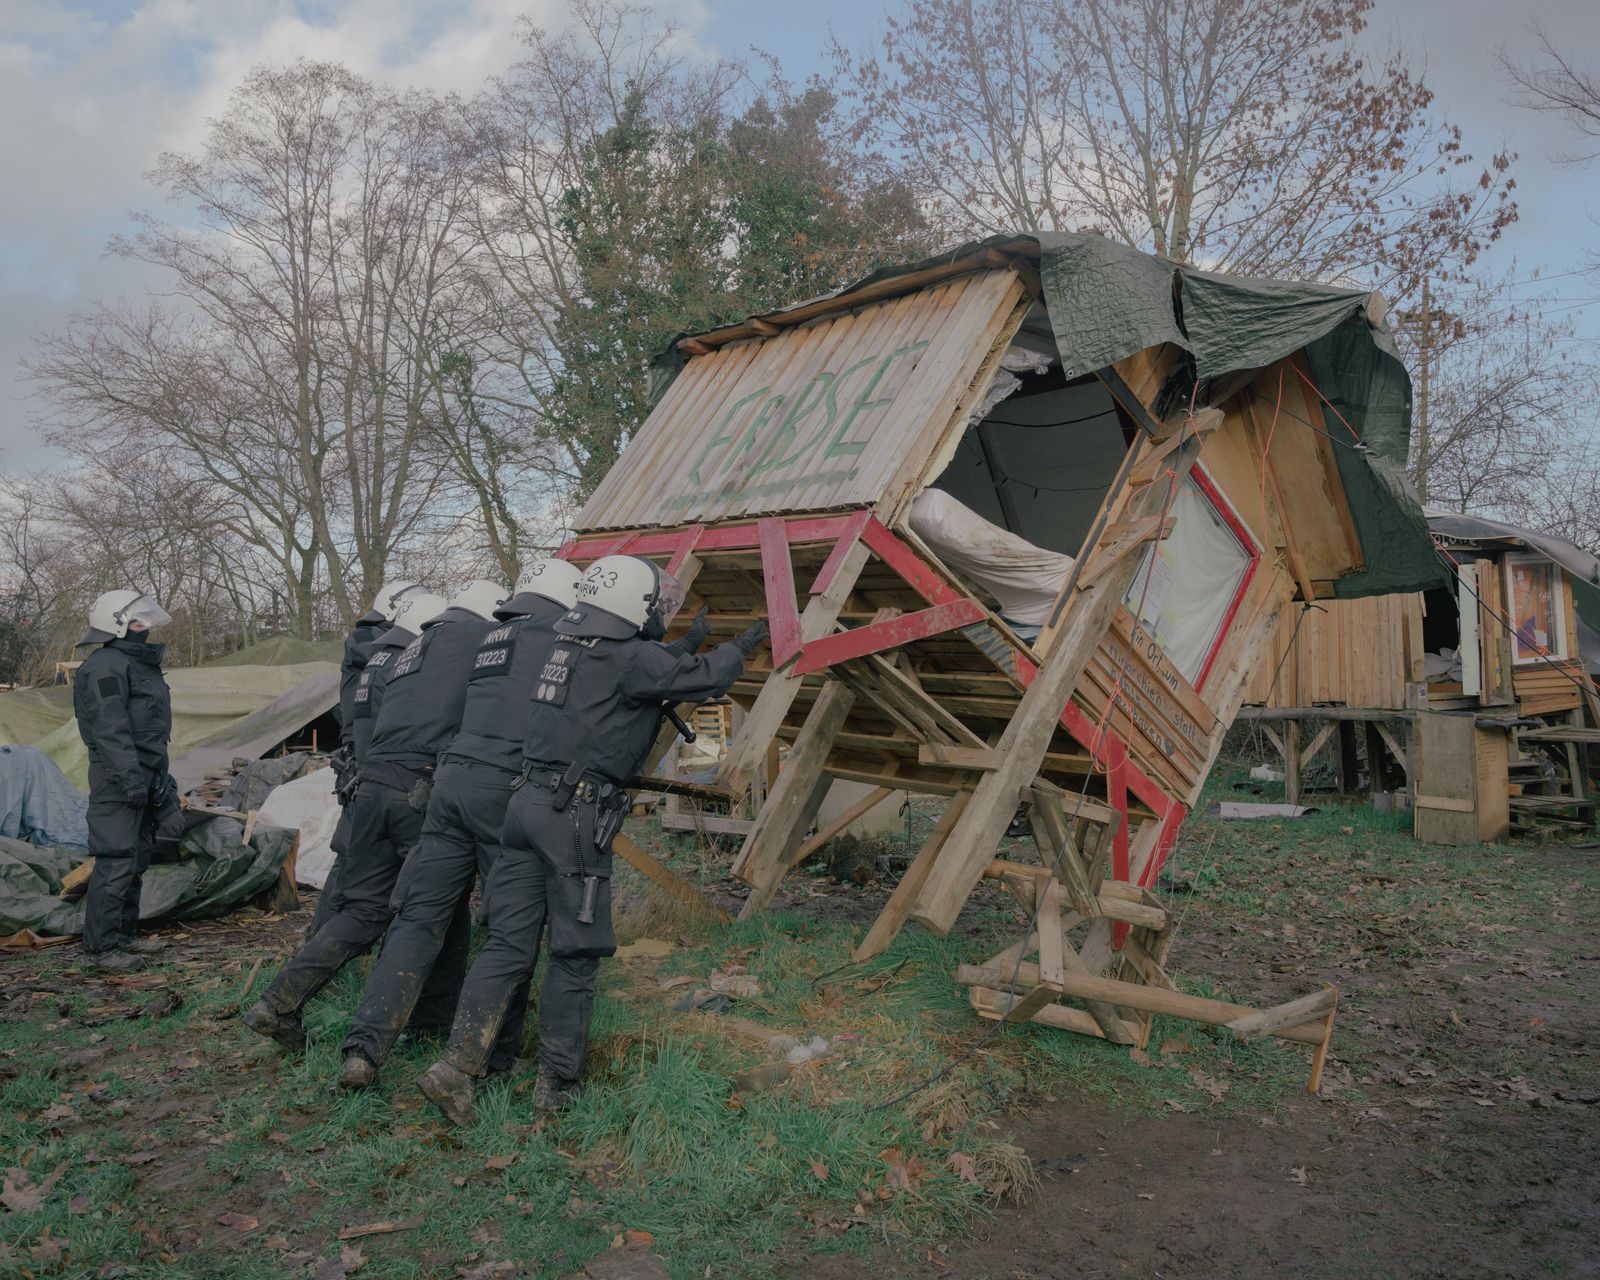 © Ingmar Björn Nolting - Image from the Eviction photography project